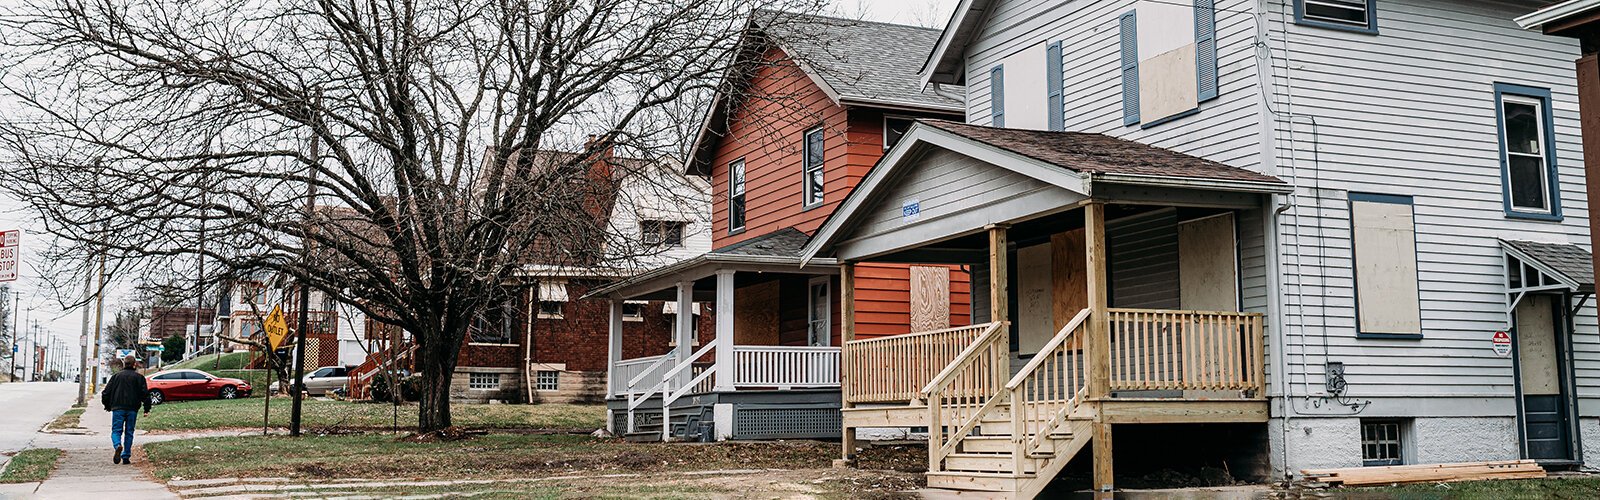 Two East Price Hill houses now owned by The Port are undergoing renovation.